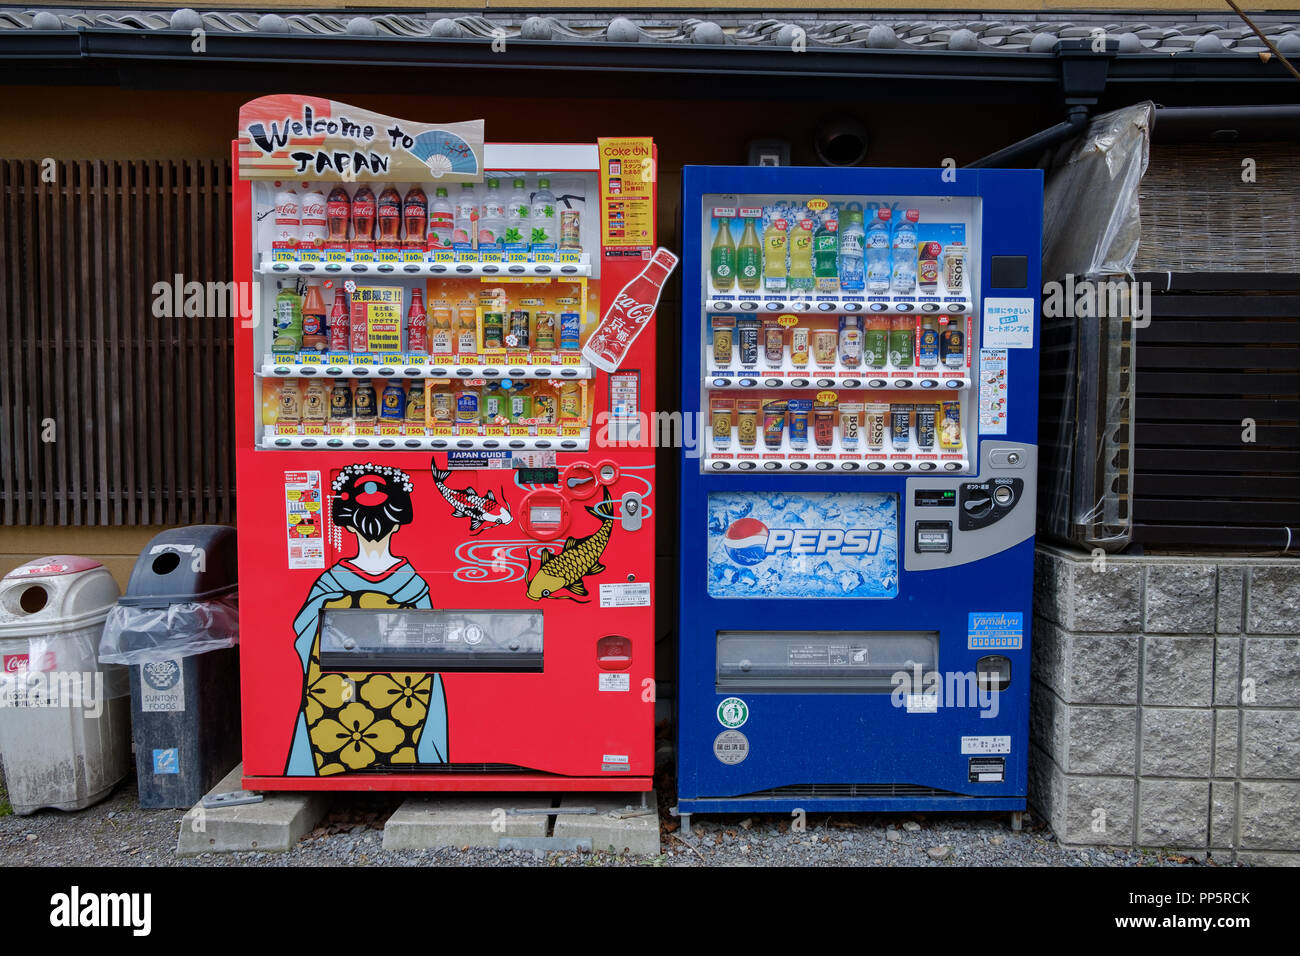 KYOTO, JAPAN - 08 FEB 2018: Coca Cola and Pepsi vending machines full of cold and hot drinks in the street competition concept Stock Photo